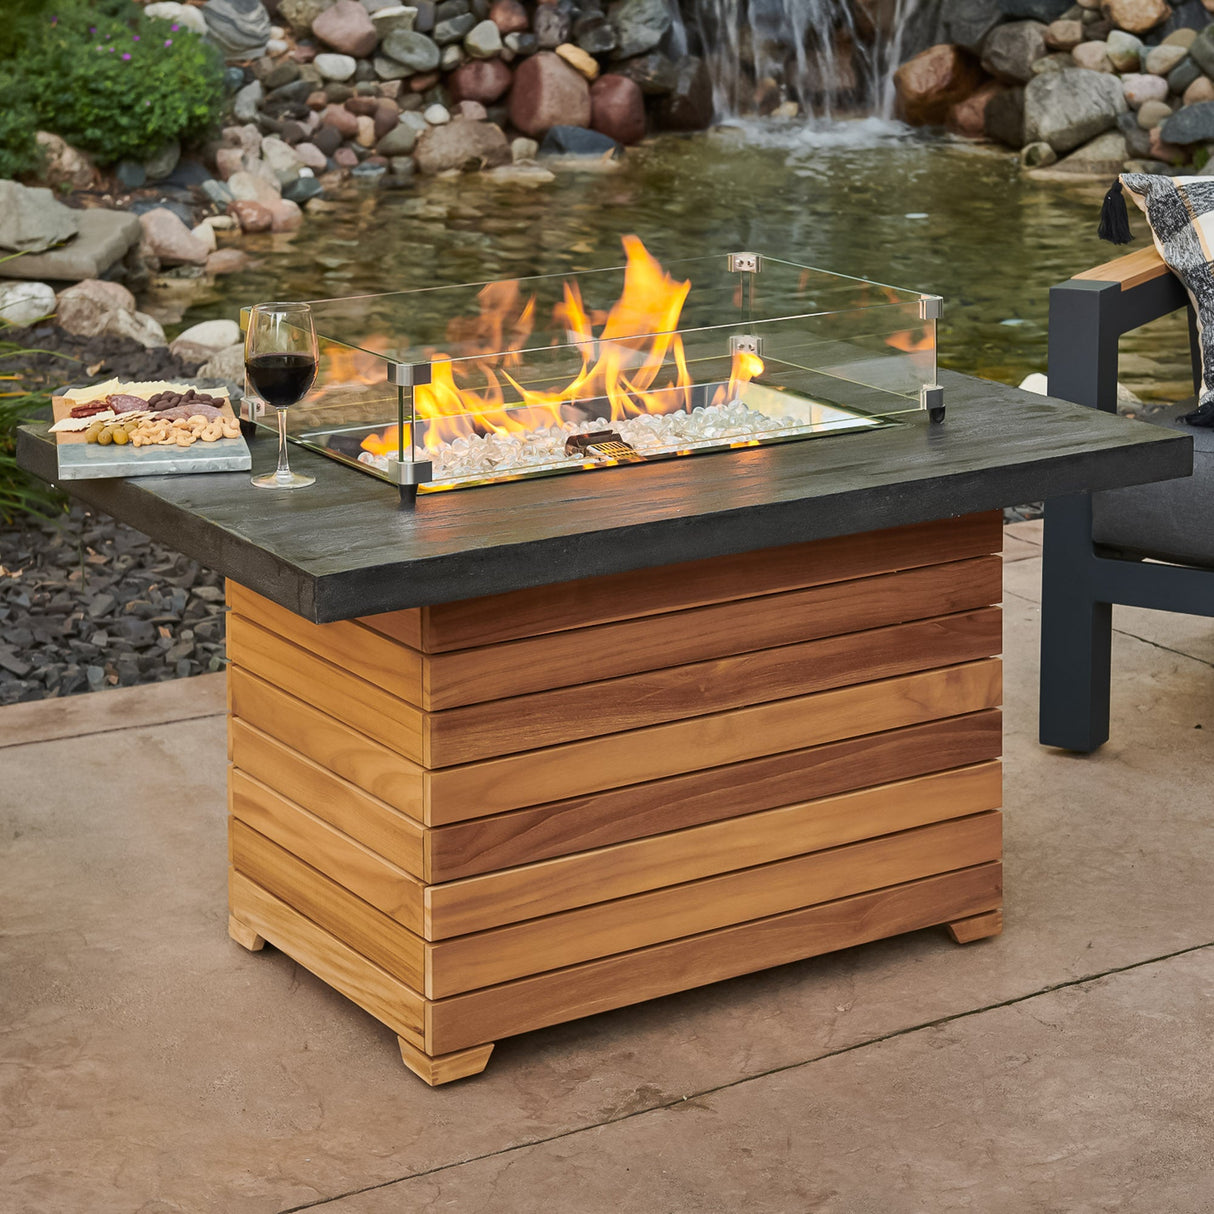 The Darien Rectangular Gas Fire Pit Table with an Everblend top being used as a table with food and drink